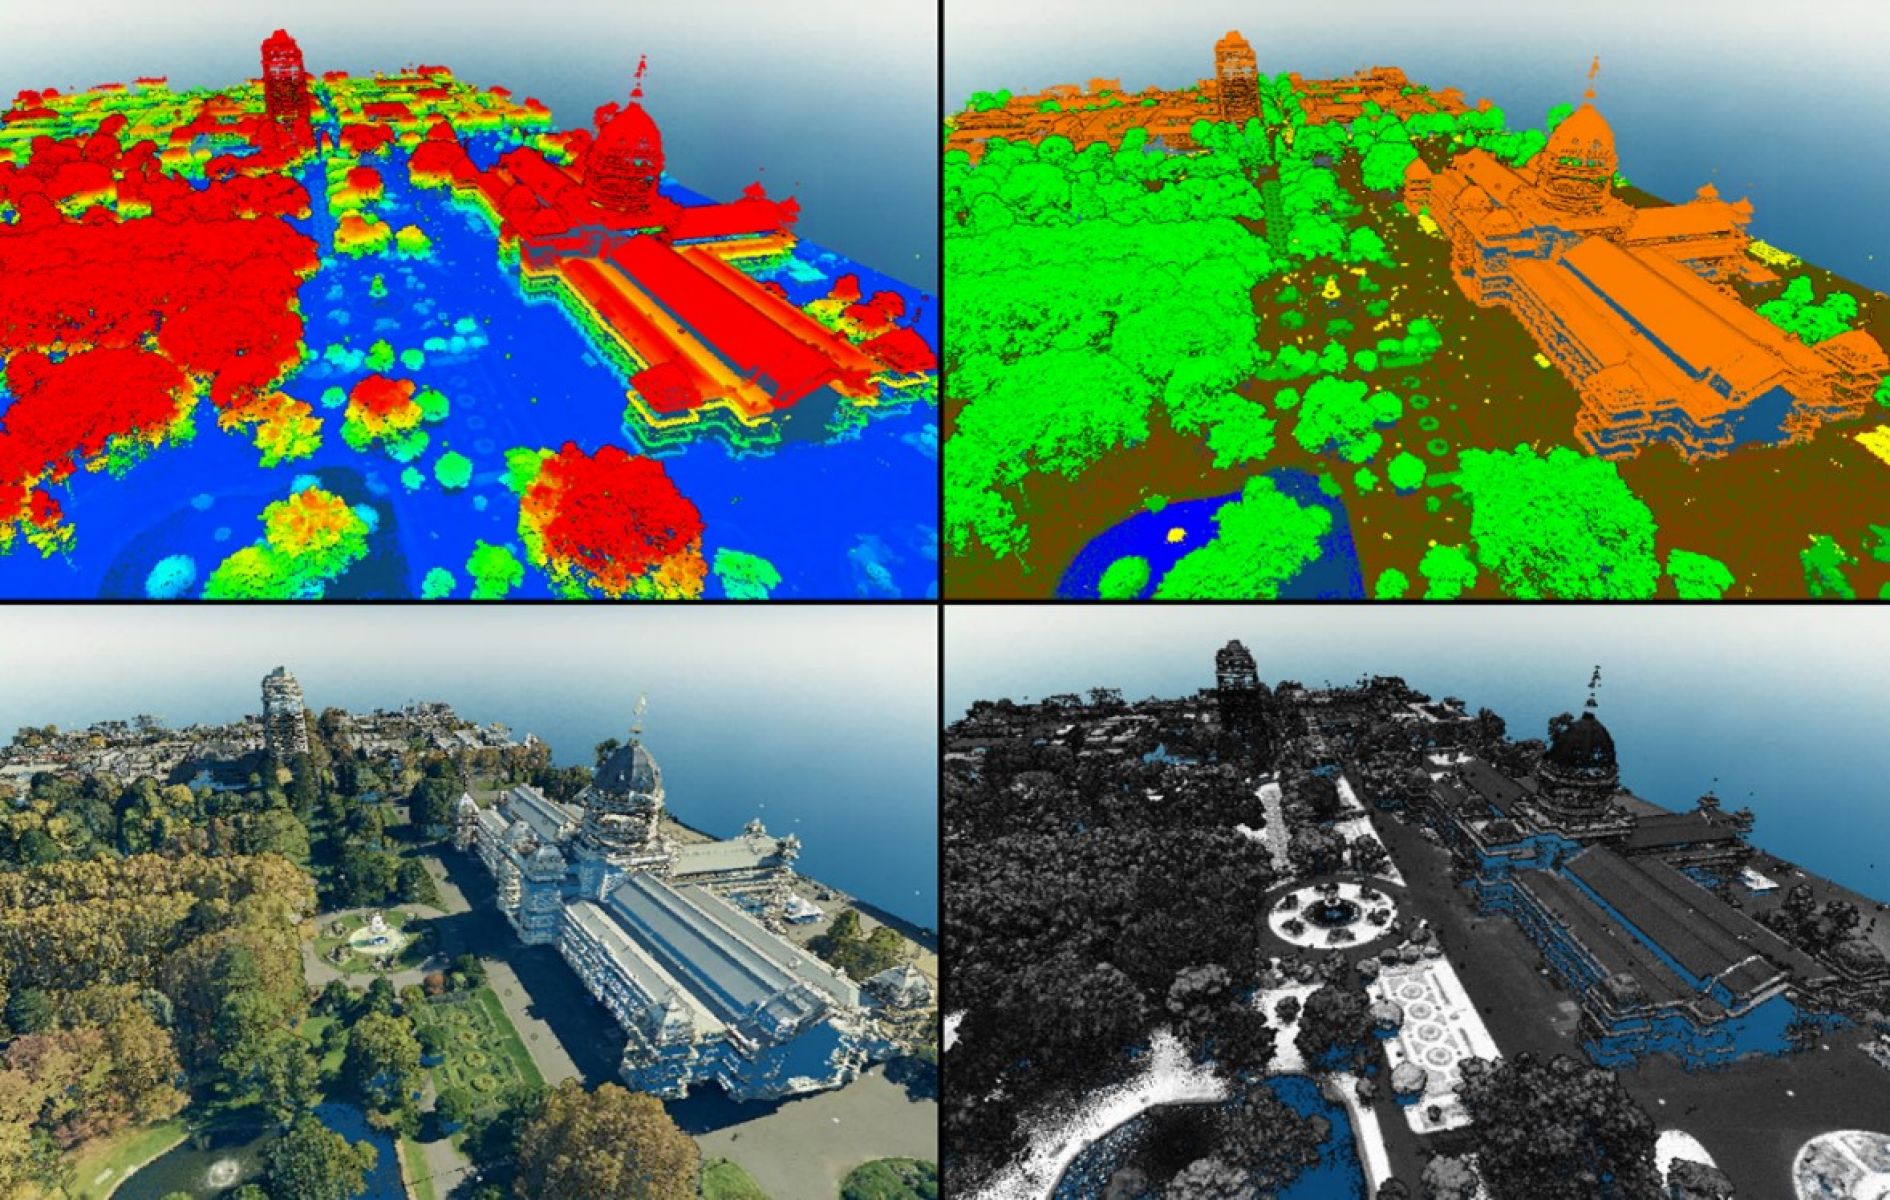 Royal Exhibition Building in Melbourne with four different LiDAR point cloud data symbology views